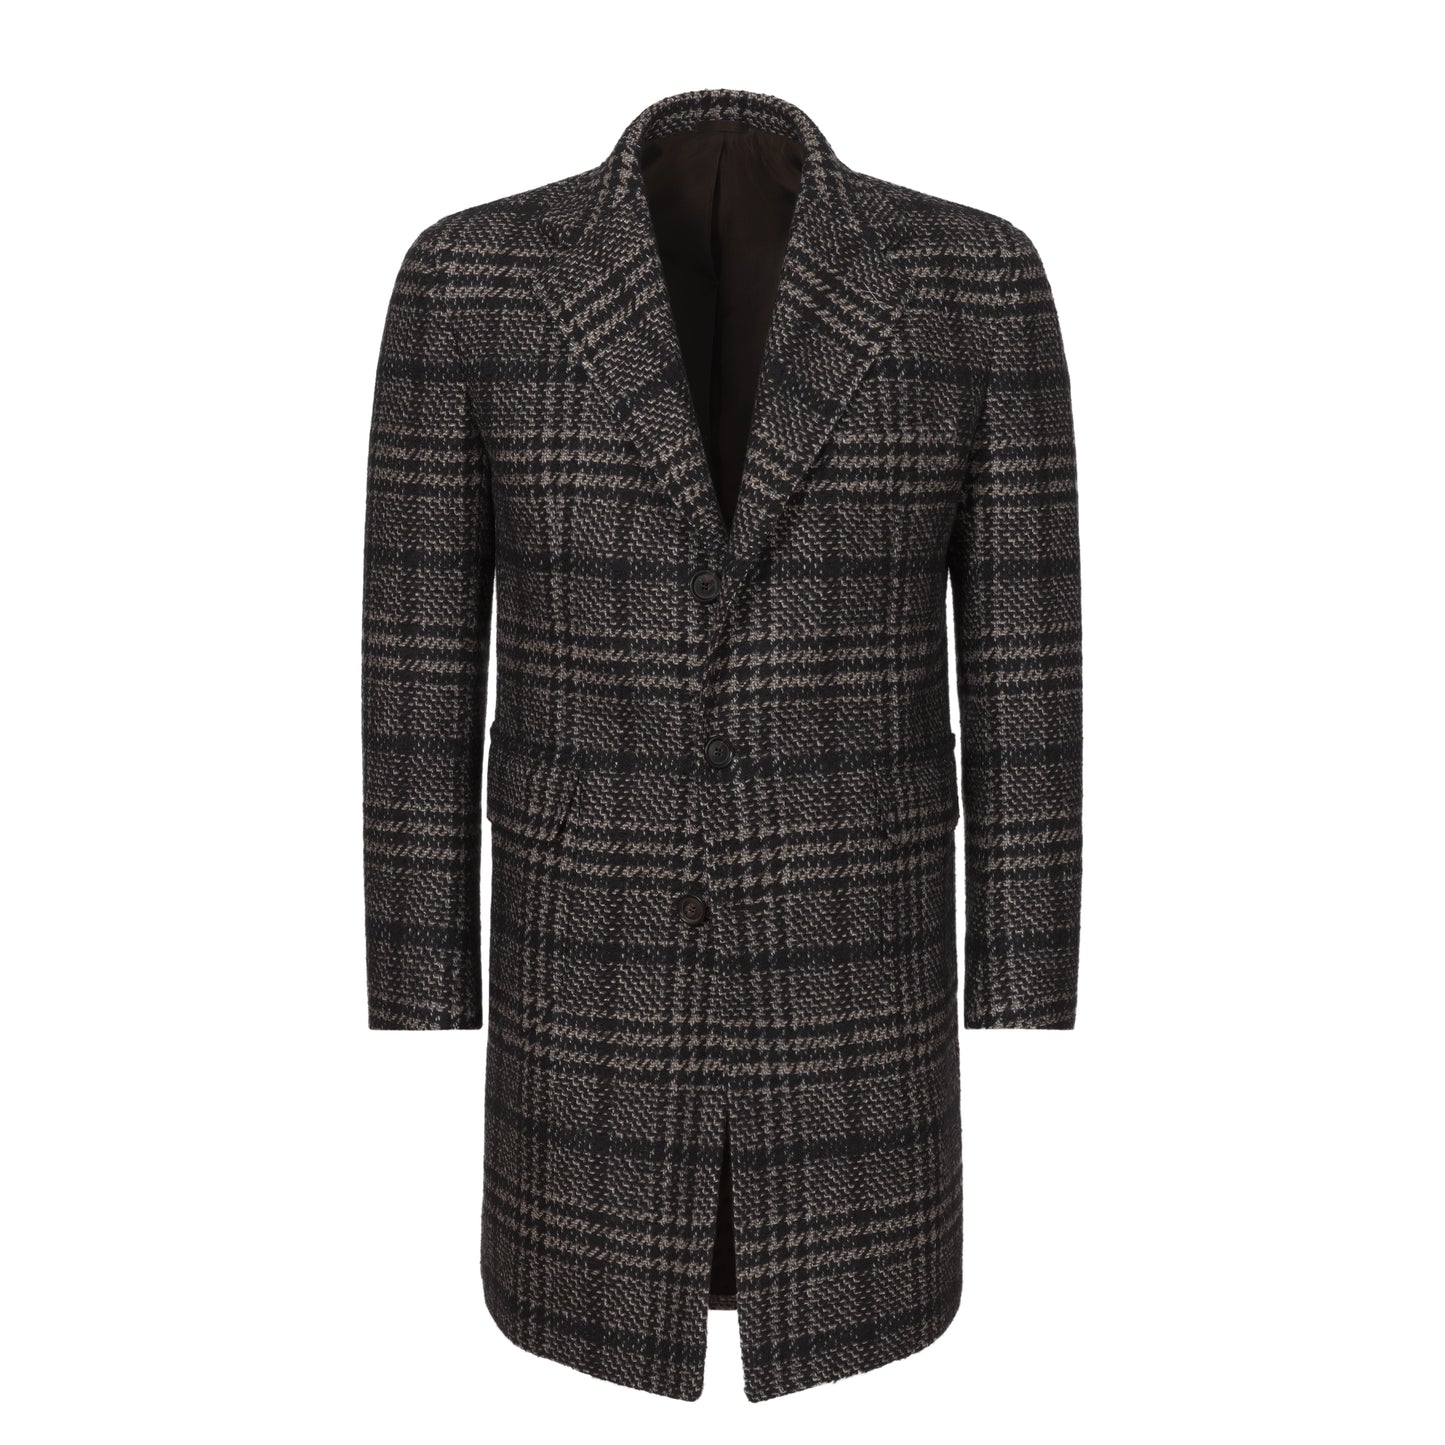 Single-Breasted Wool Coat in Black and Warm White. Exclusively Made for Sartale